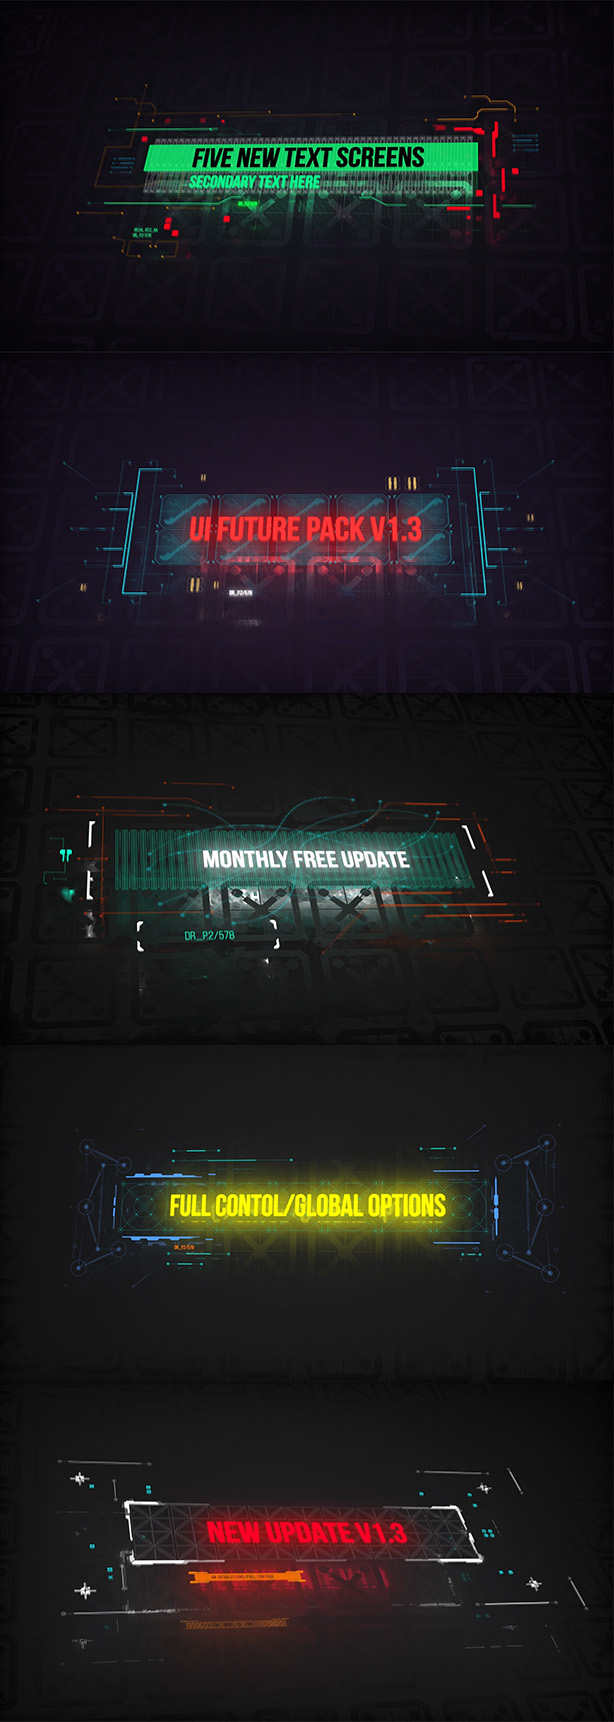  UI FUTURE PACK V1.5/ Monthly FREE HUD Update/ Call-Outs/ Transitions/ Glitch/ Interface 